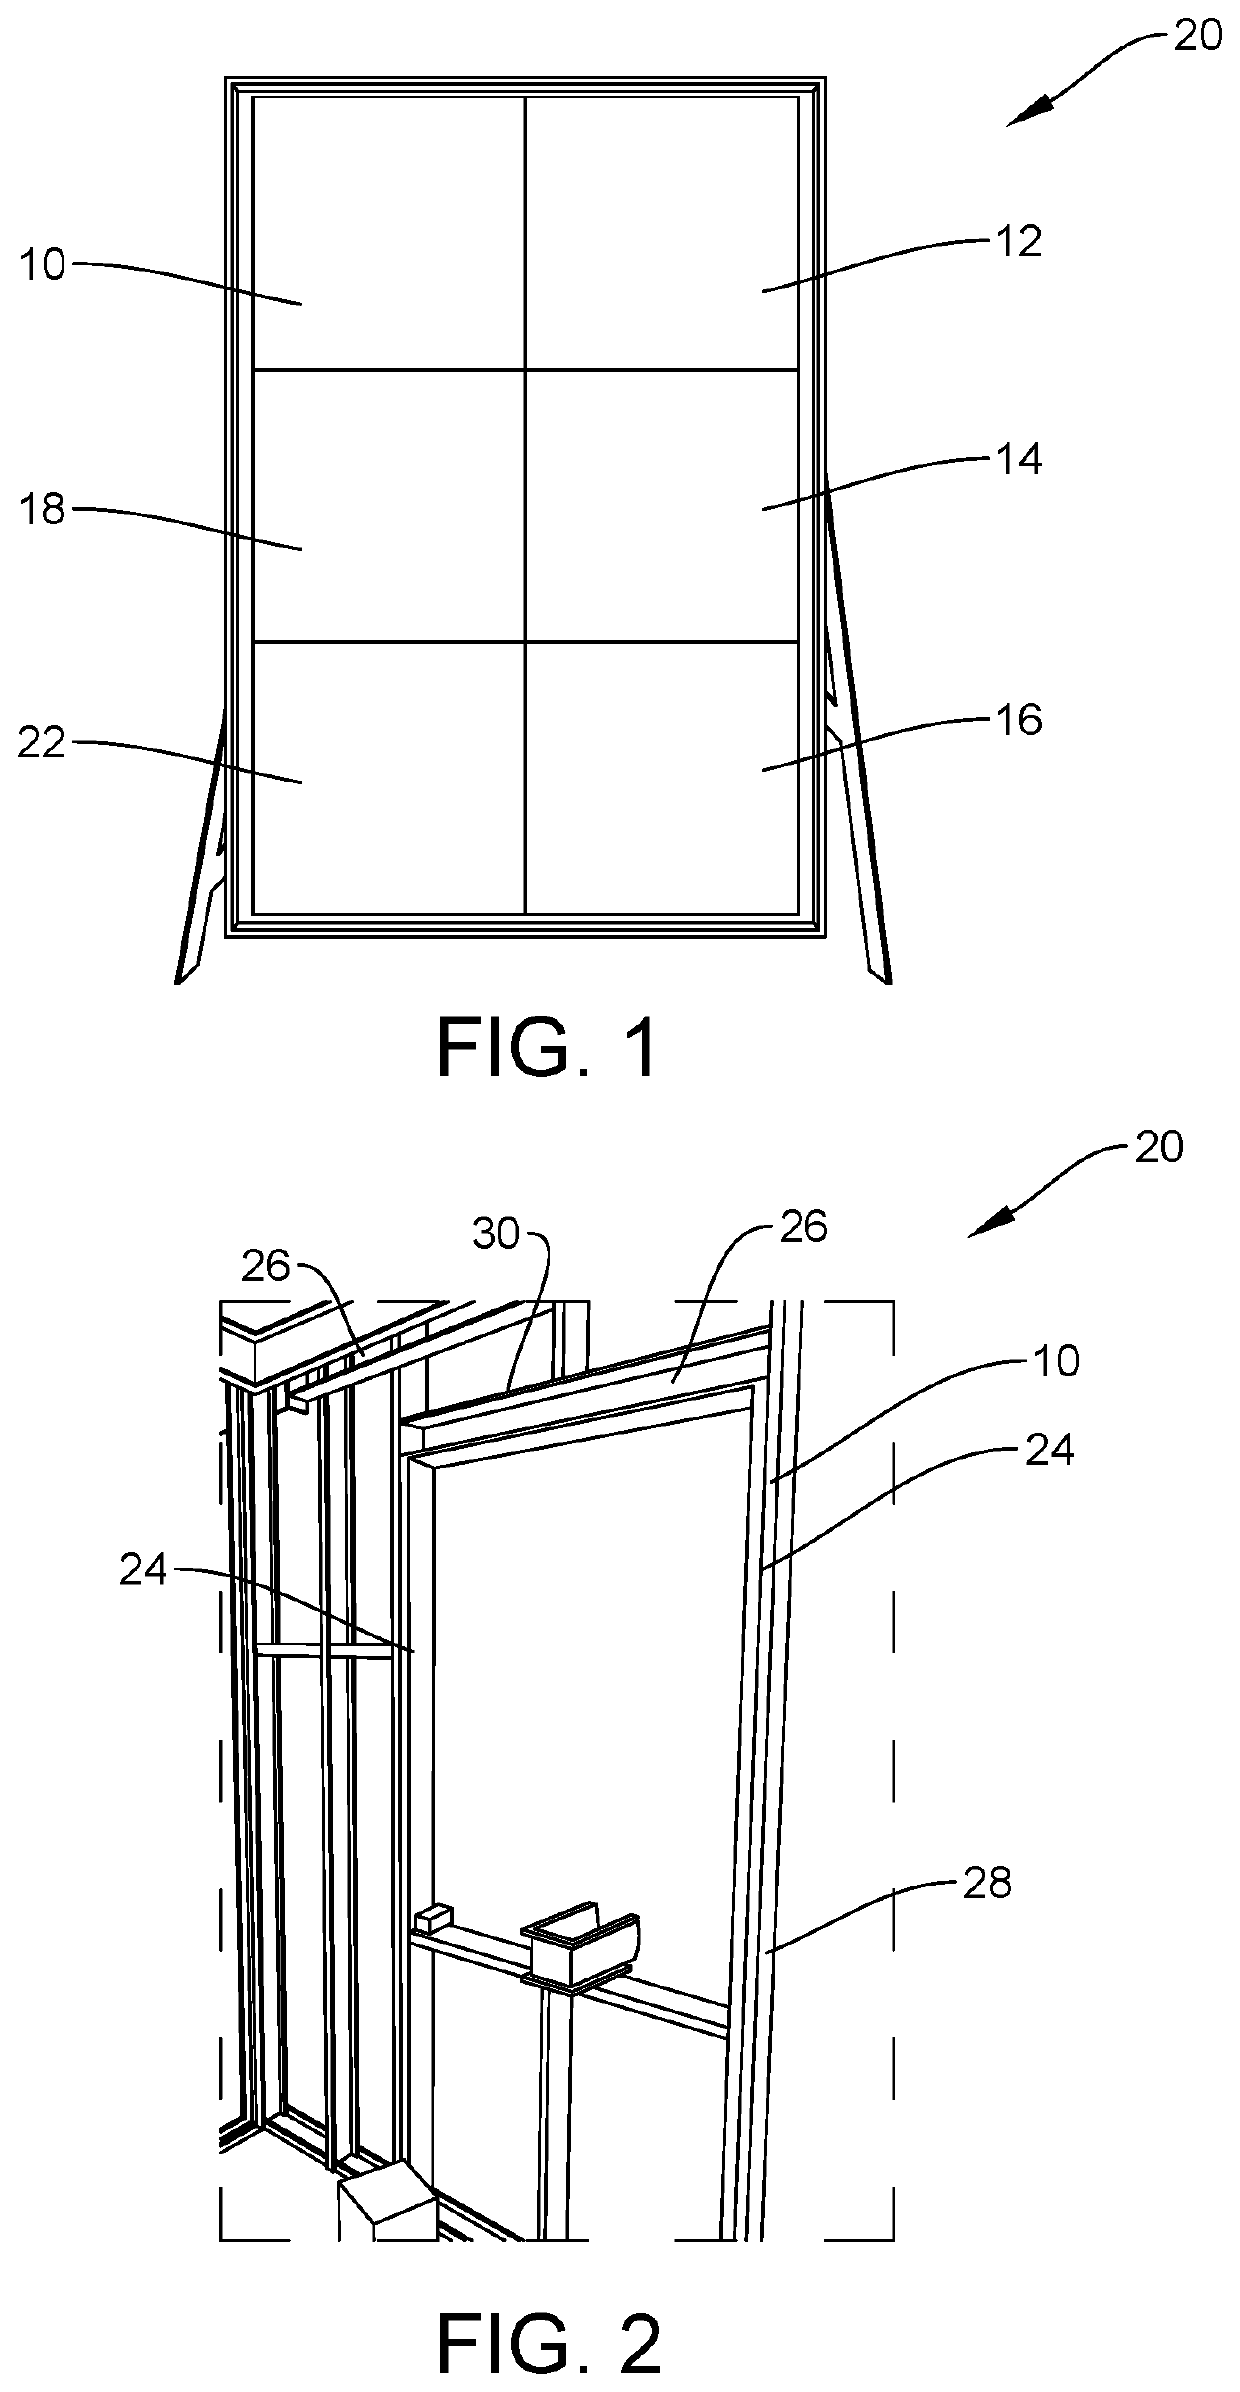 Apparatus, system and methods for structural exerior wall panel building systems